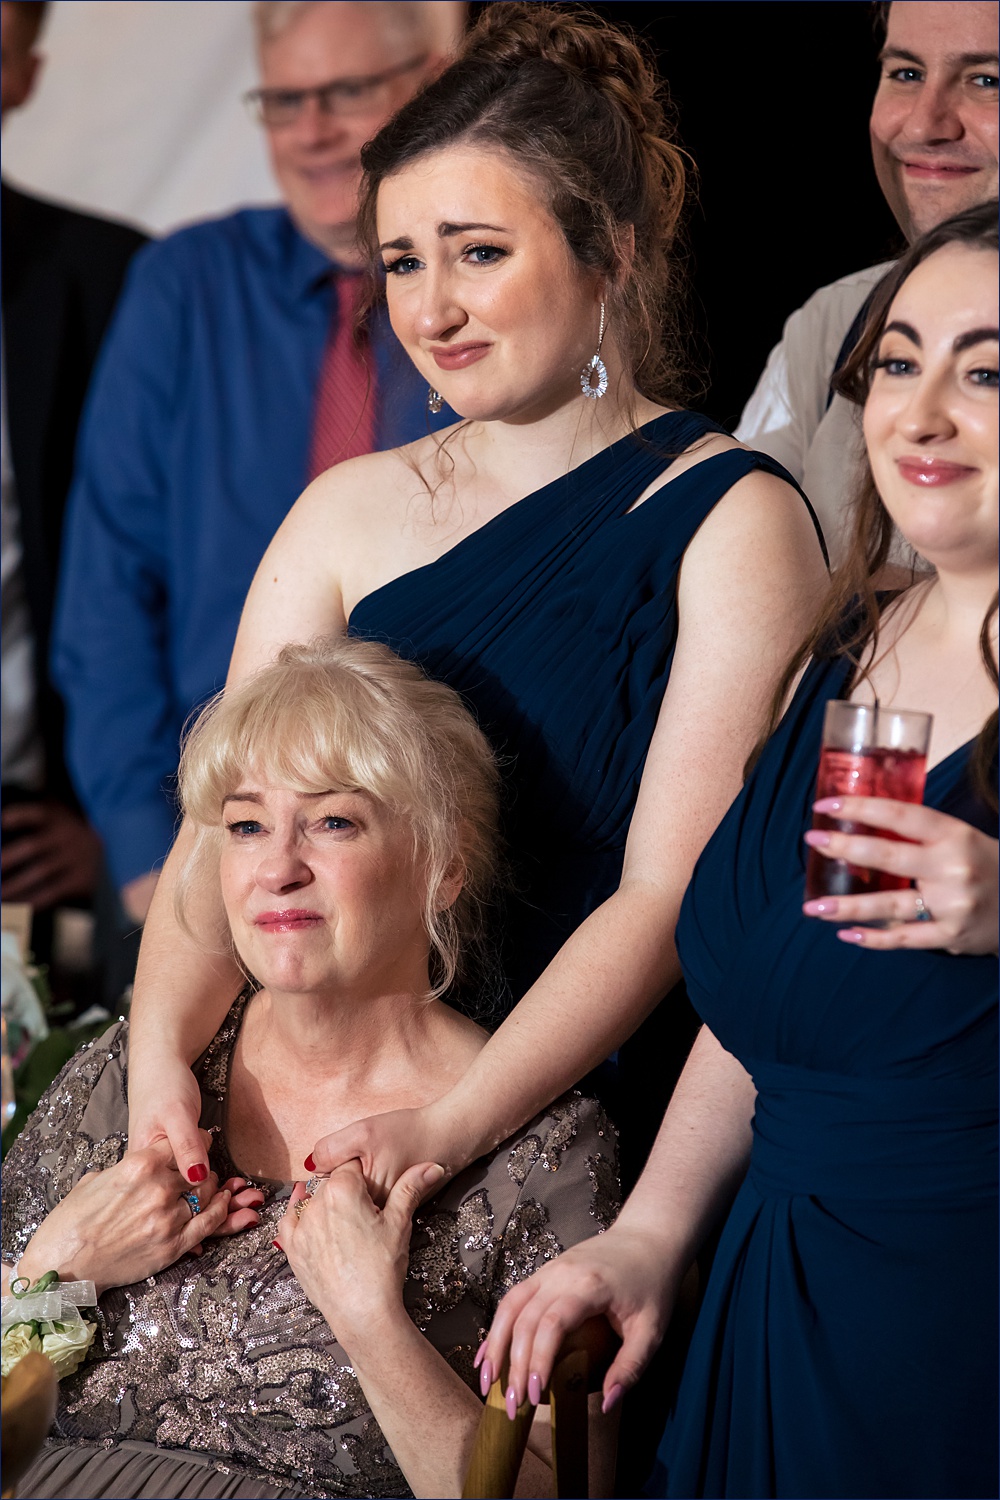 Mother of the bride and her daughter get emotional